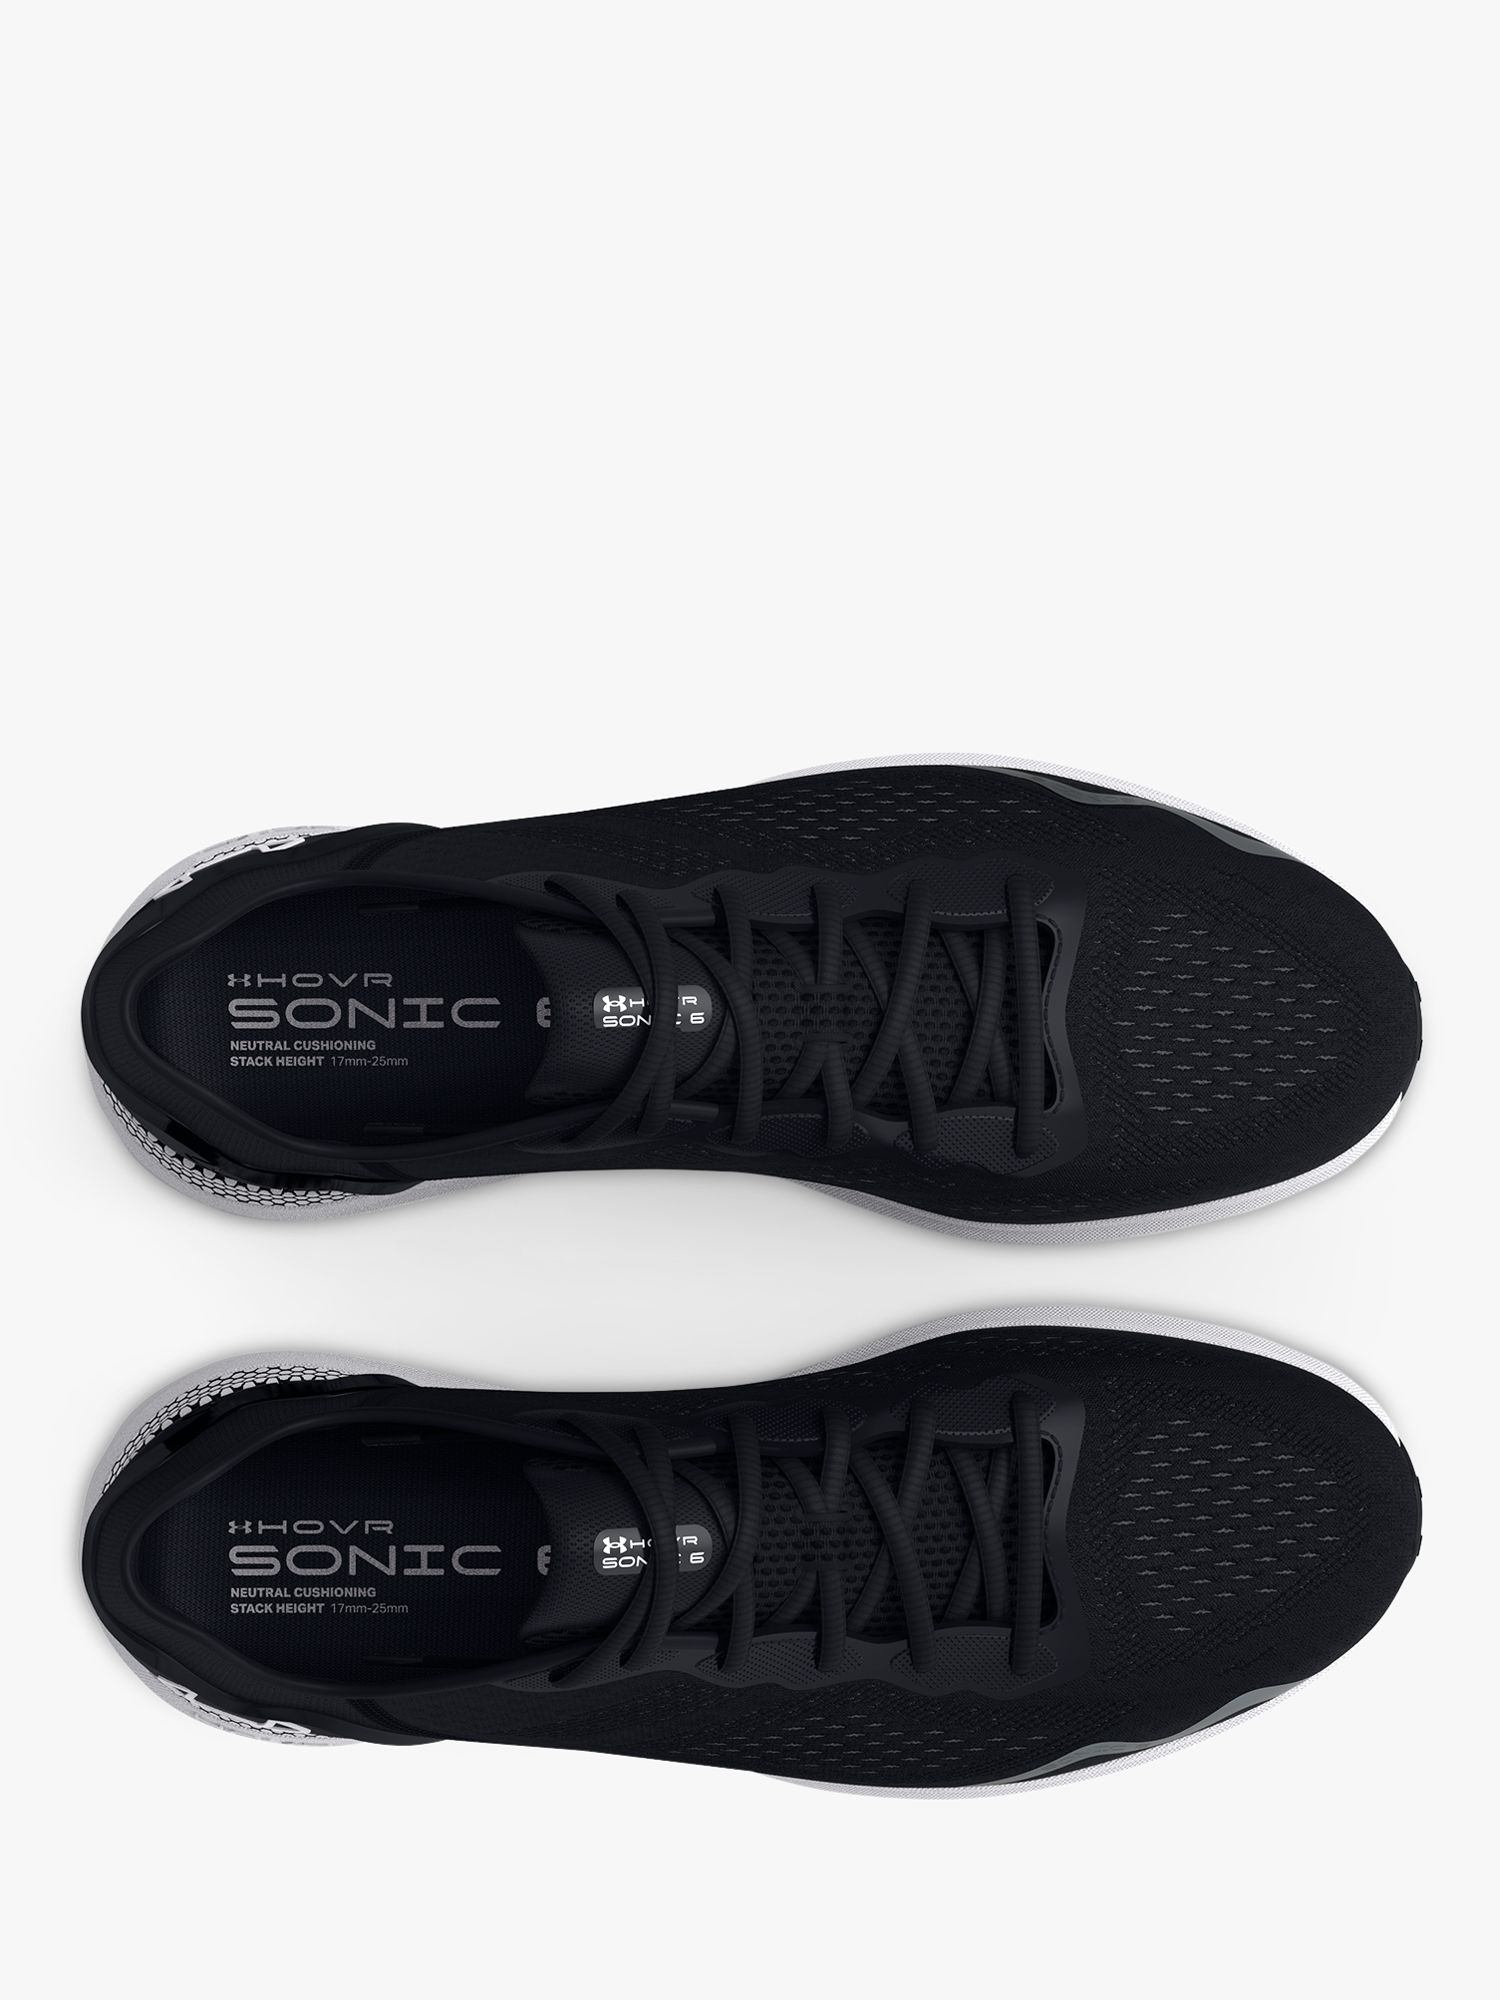 Buy Under Armour HOVR Sonic 6 Women's Running Shoes Online at johnlewis.com